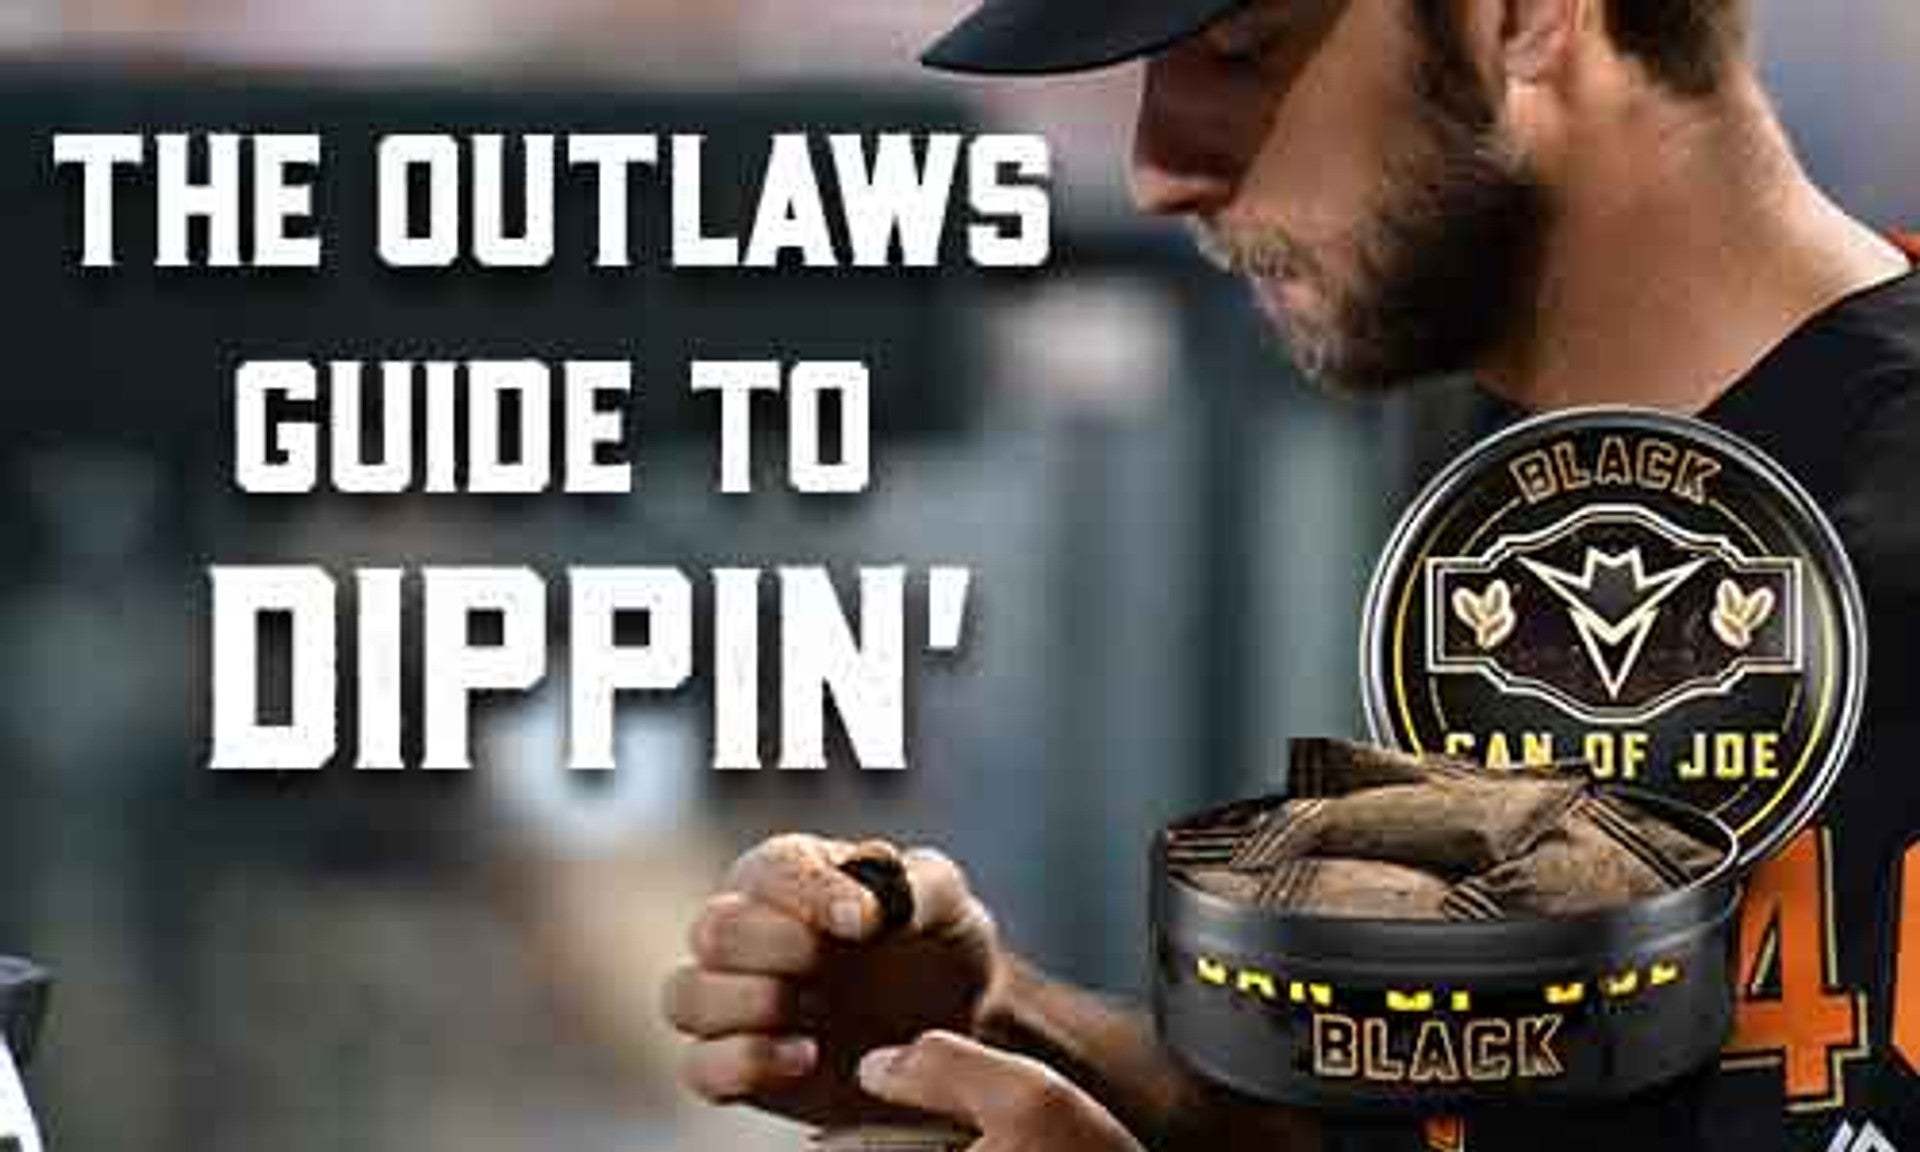 The Outlaws Guide to DIPPING